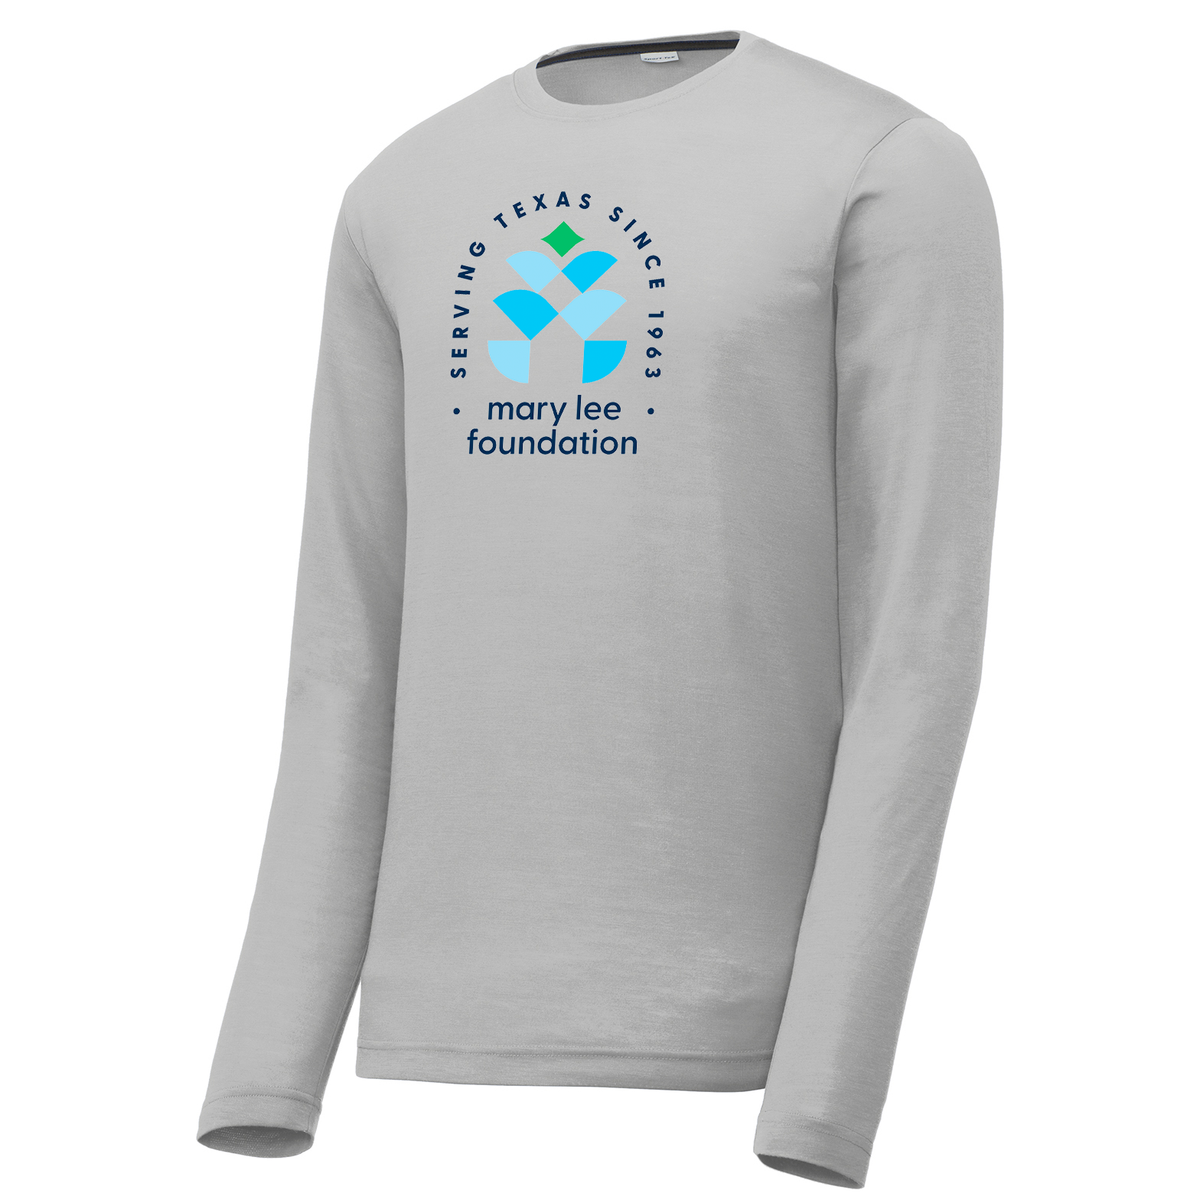 Mary Lee Foundation Long Sleeve CottonTouch Performance Shirt